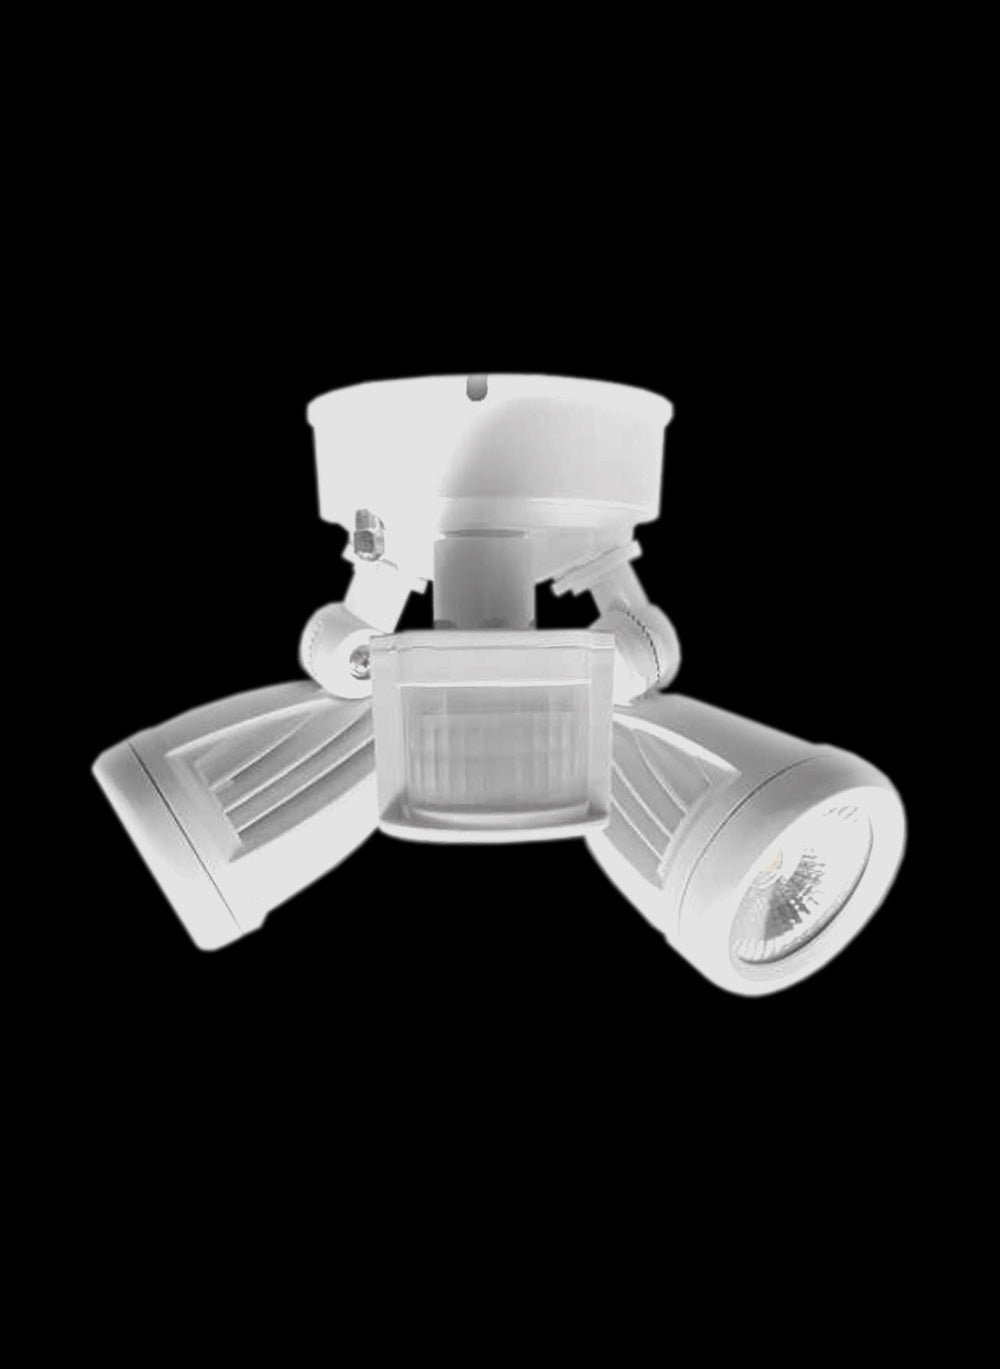 Twin Security Light White